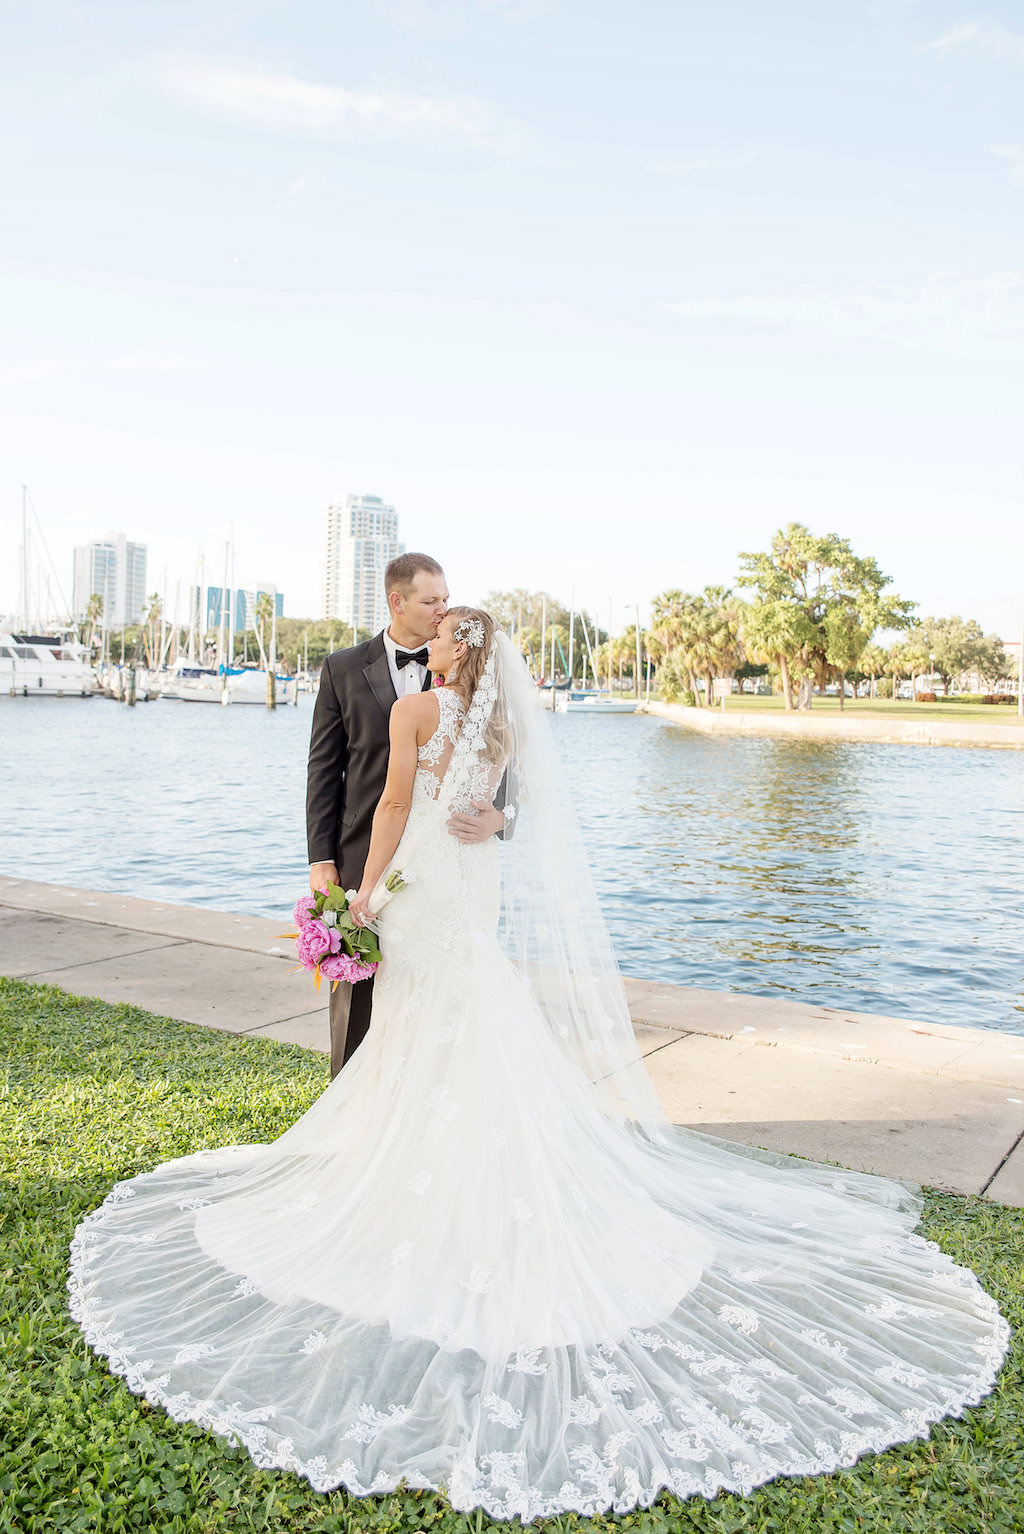 Outdoor Waterfront Bride and Groom Wedding Portrait with Pink Peony with Greenery Bouquet and Long Vintage Wedding Veil | St Pete Wedding Photographer Kristen Marie Photography